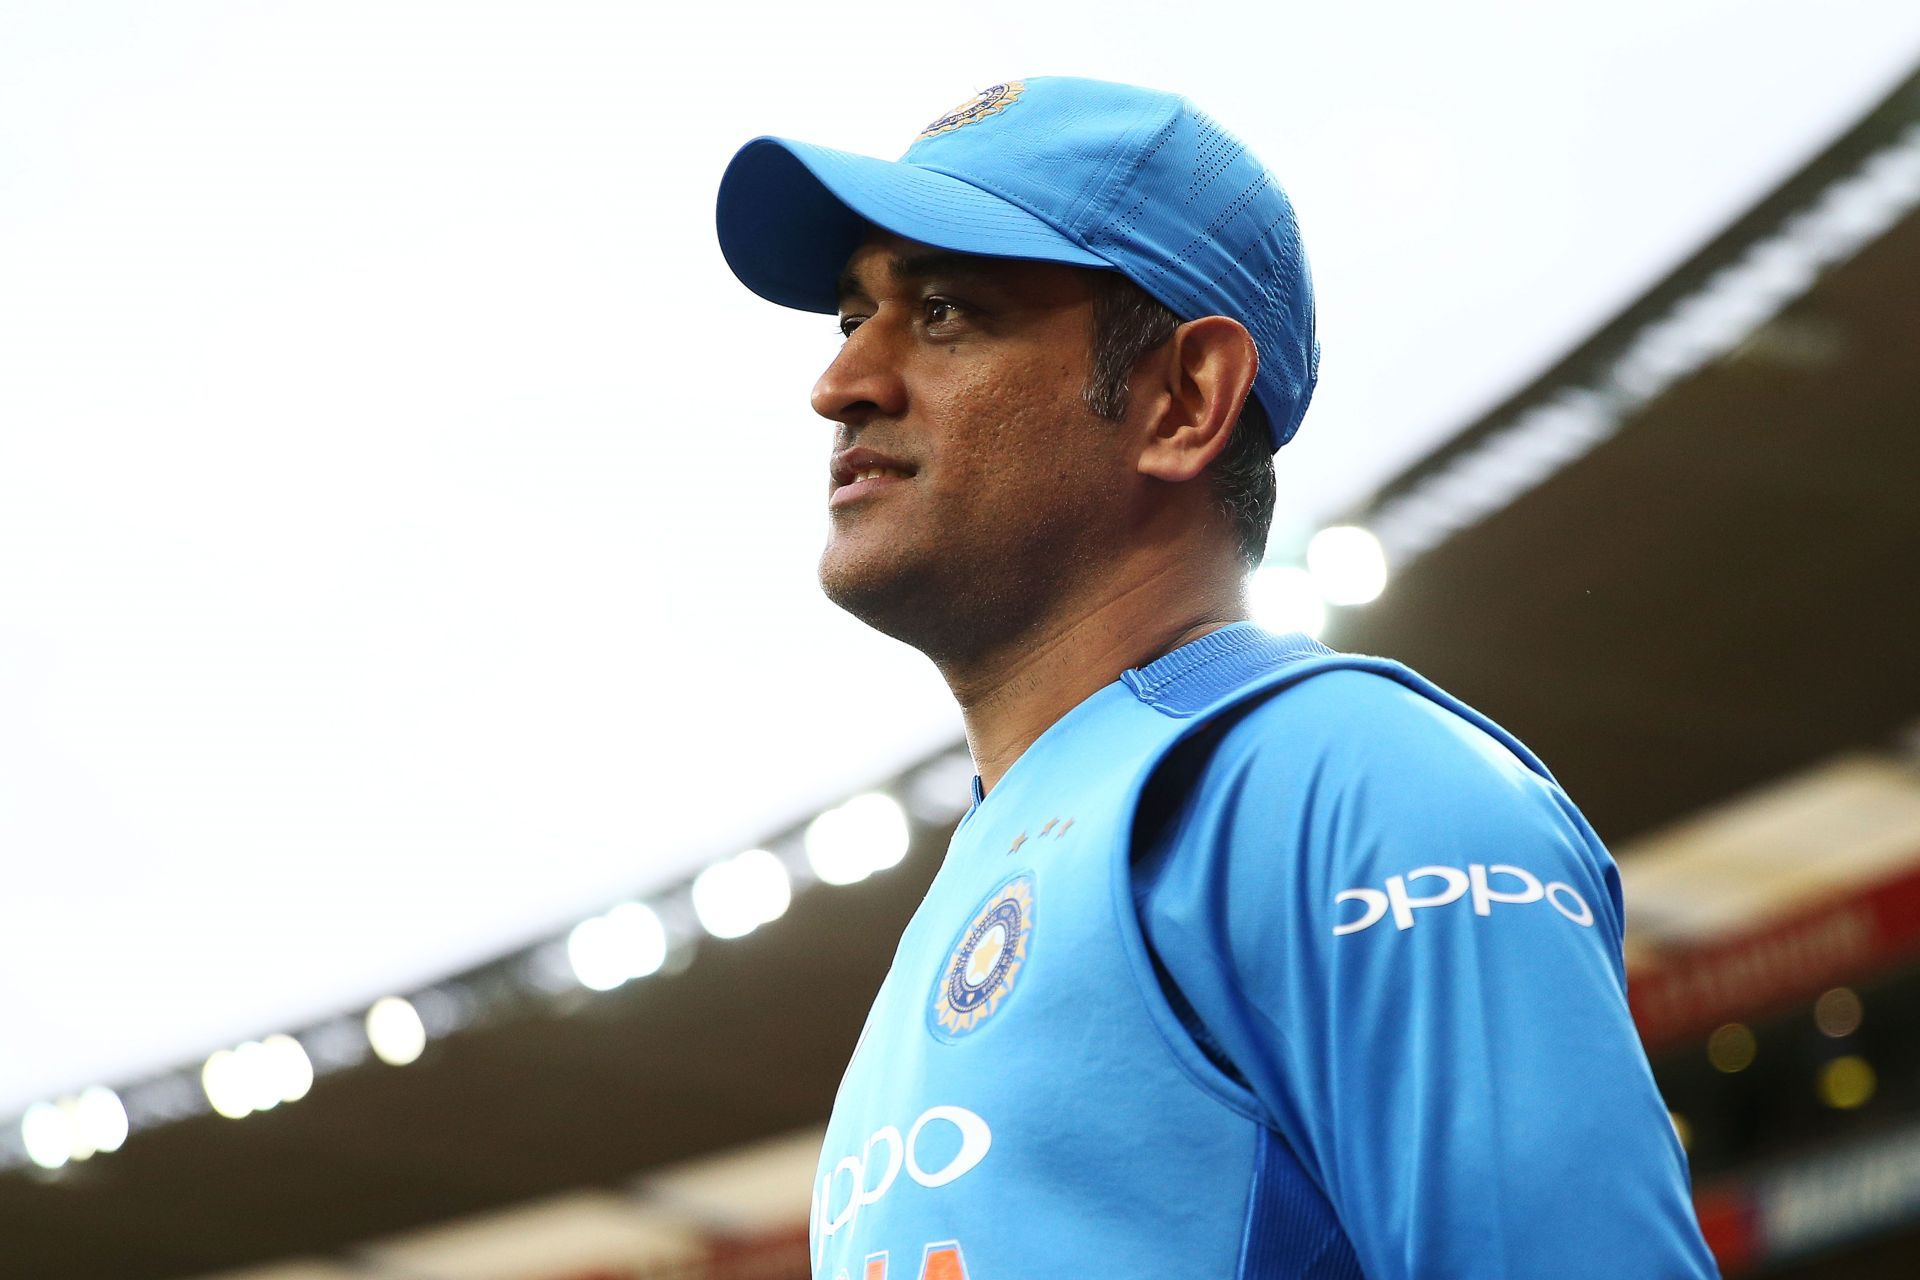 MS Dhoni could become the ideal mentor for Team India